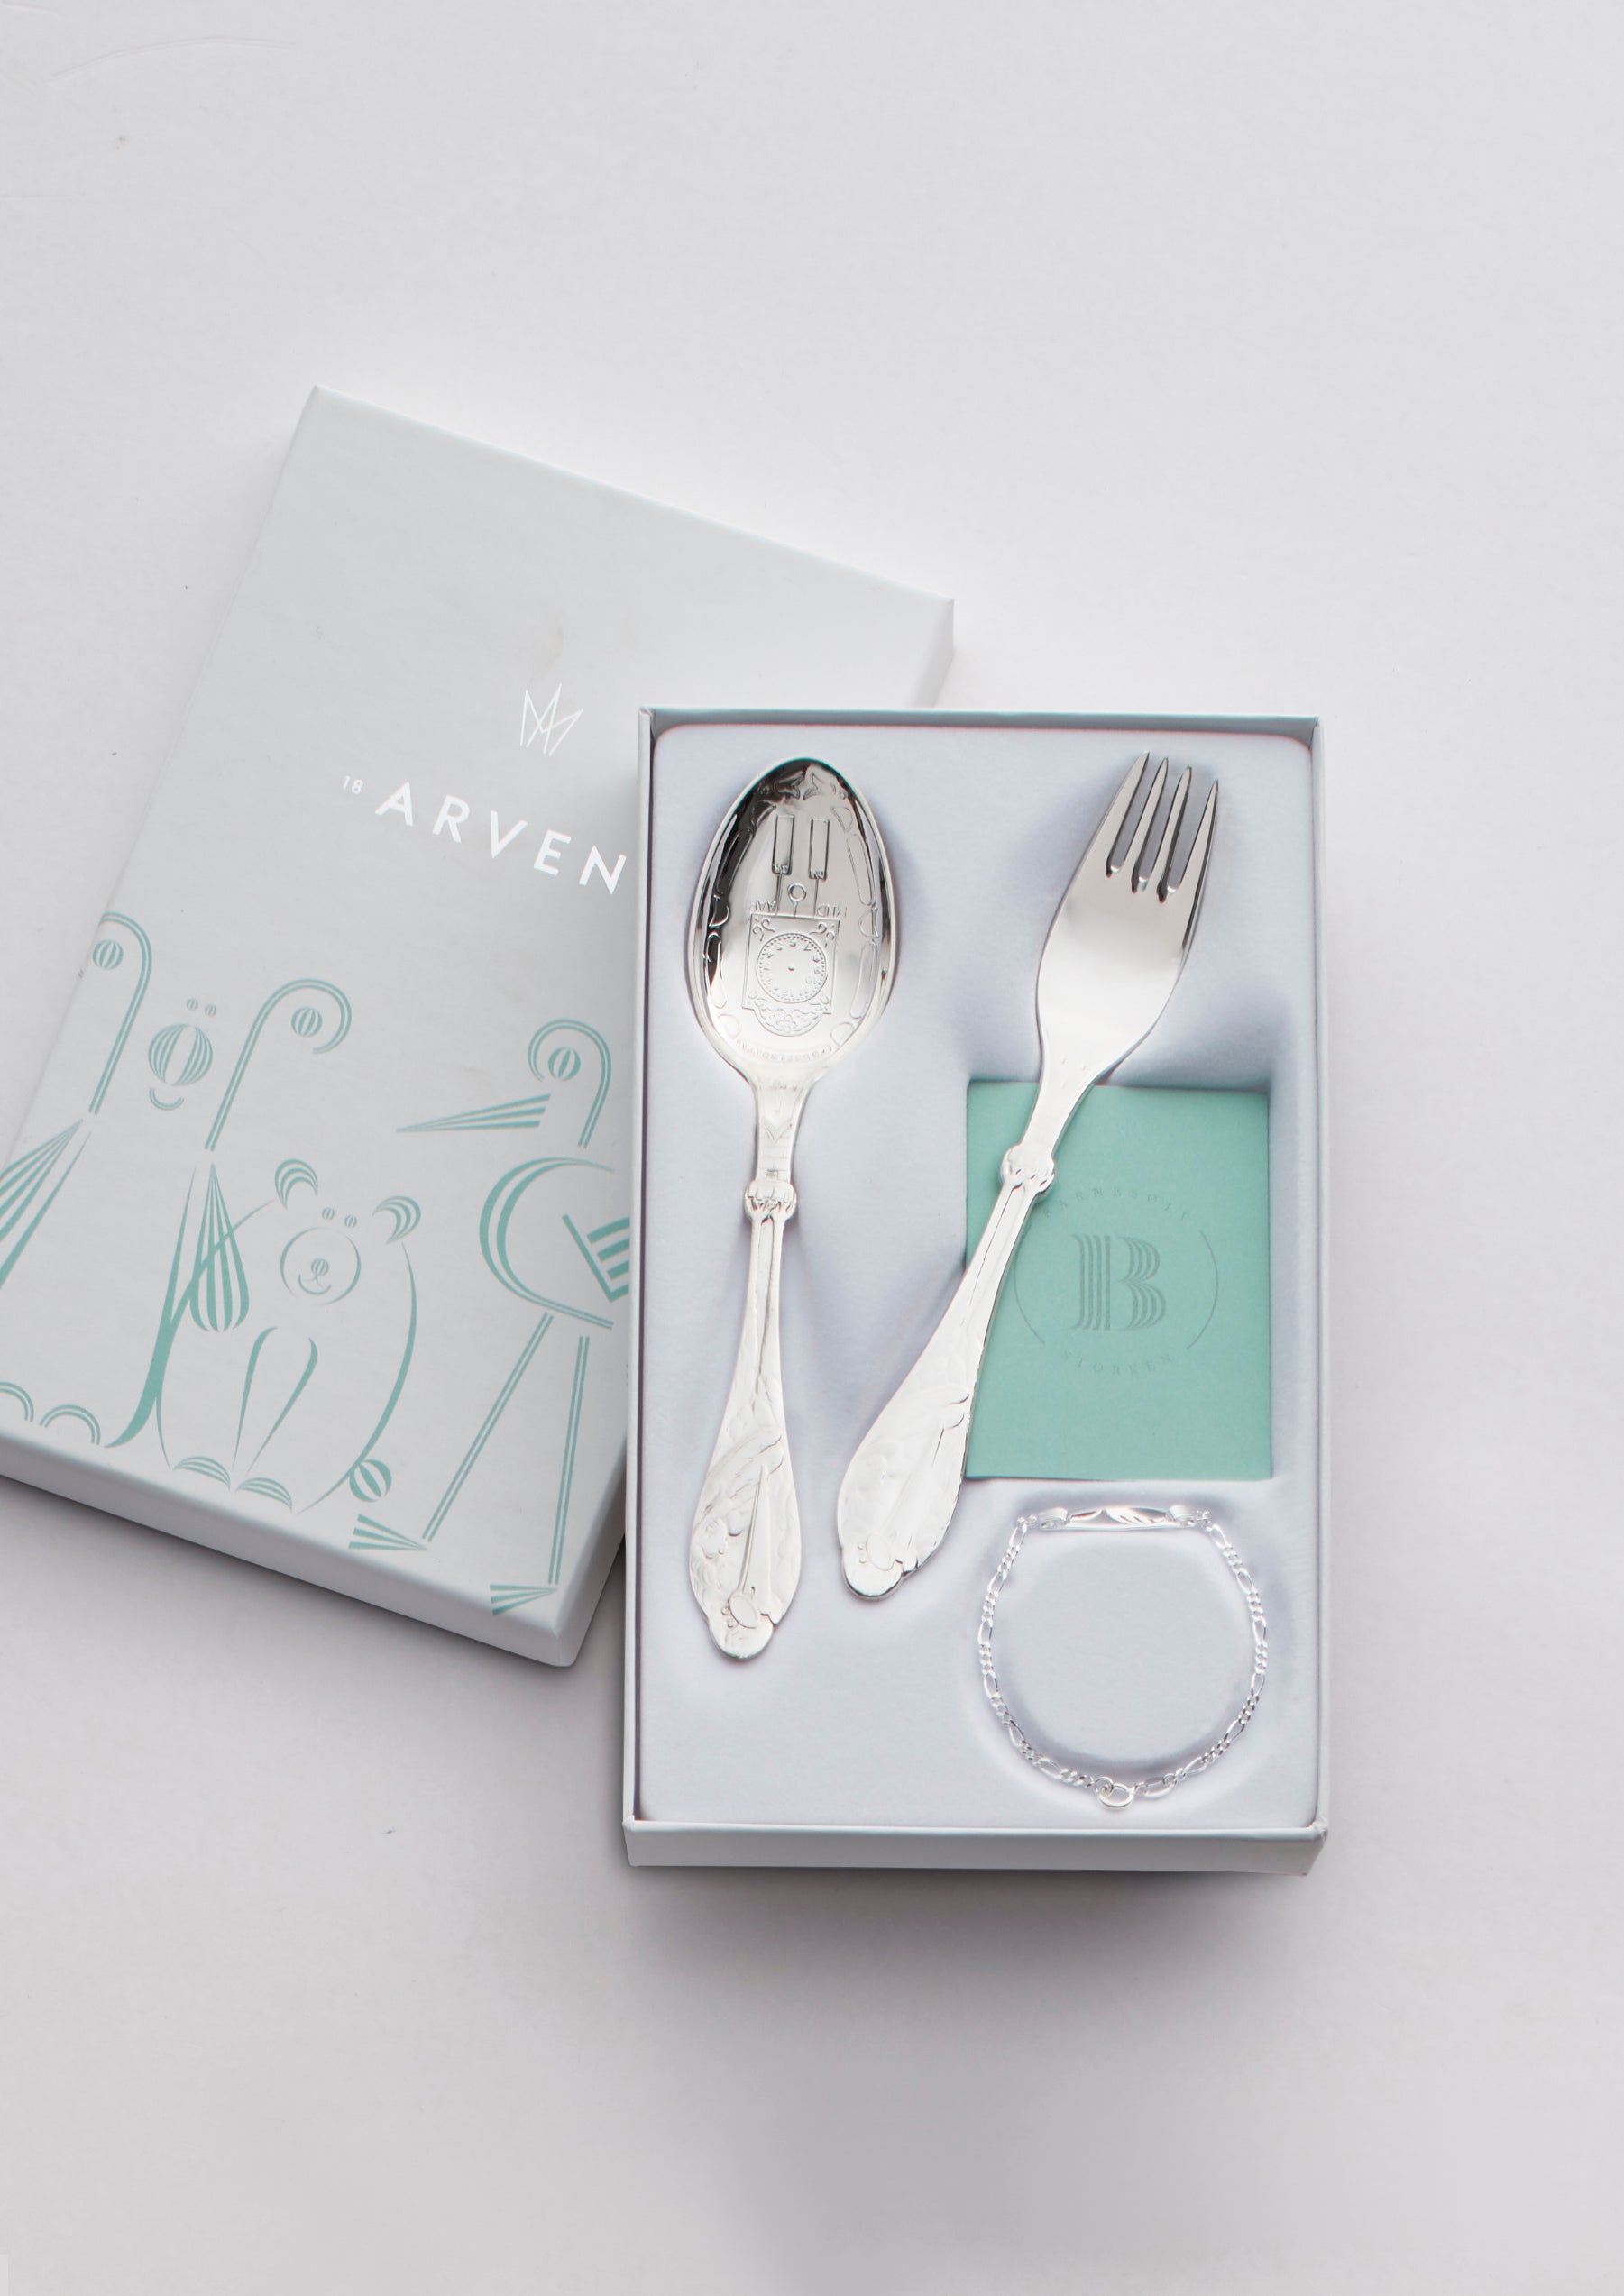 Stork spoon and fork set